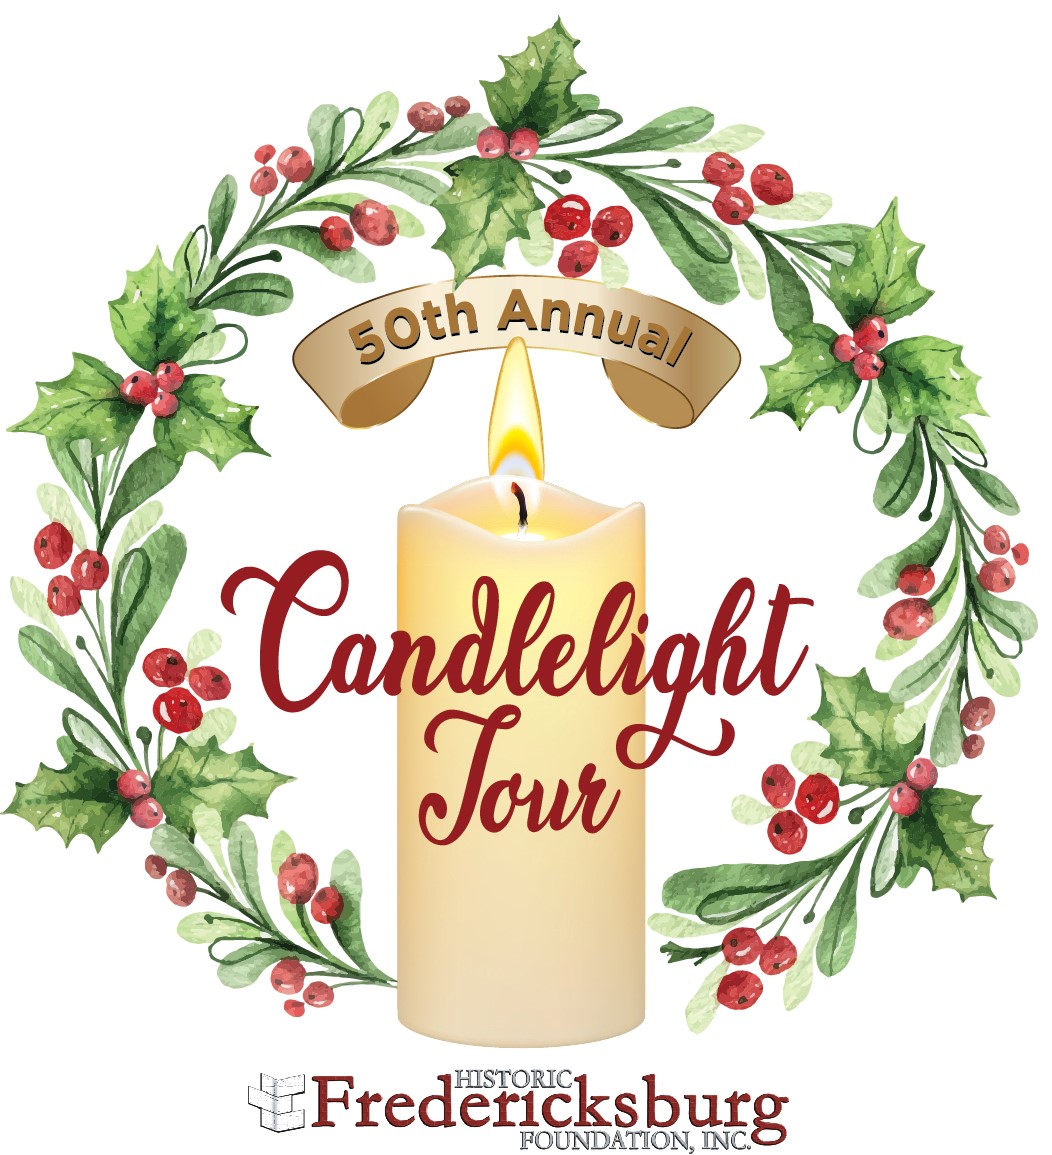 Fredericksburg Candlelight Tour to be offered virtually